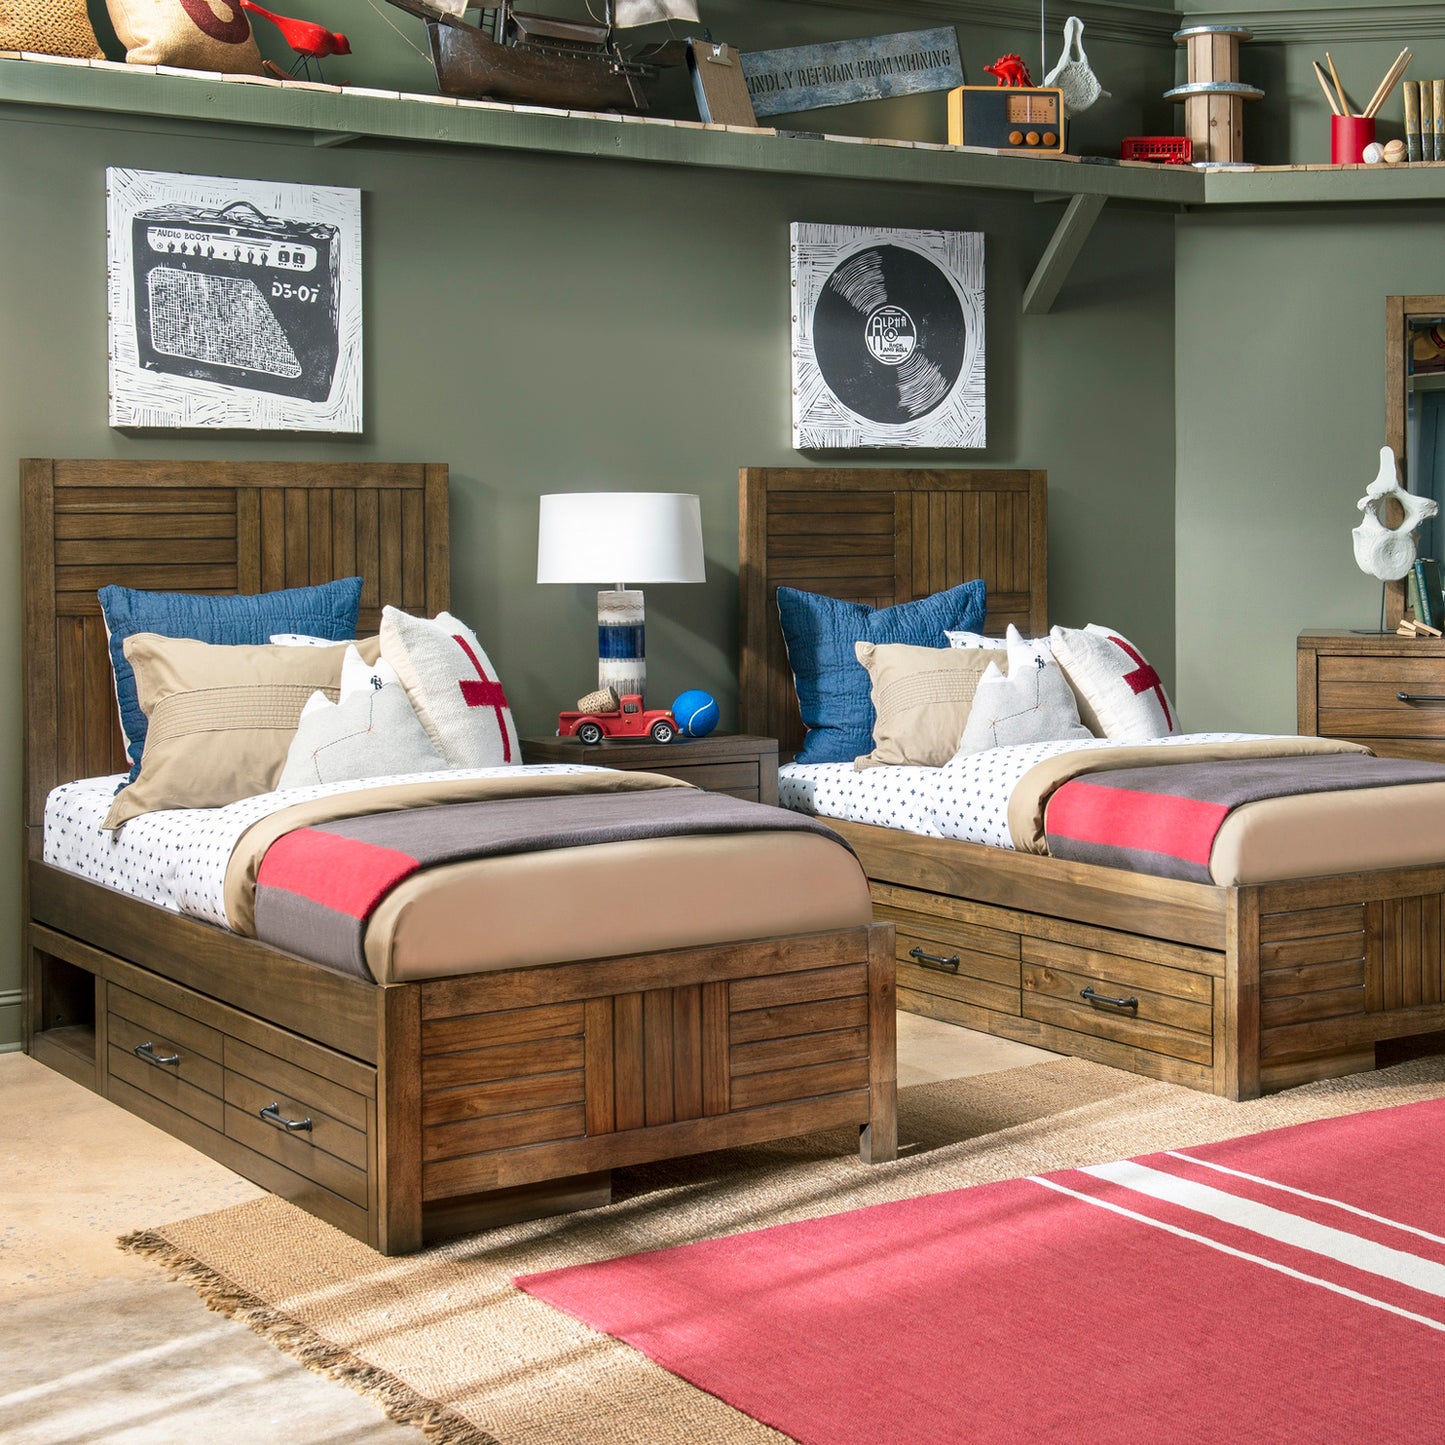 Summer Camp Twin Panel Bed - Brown